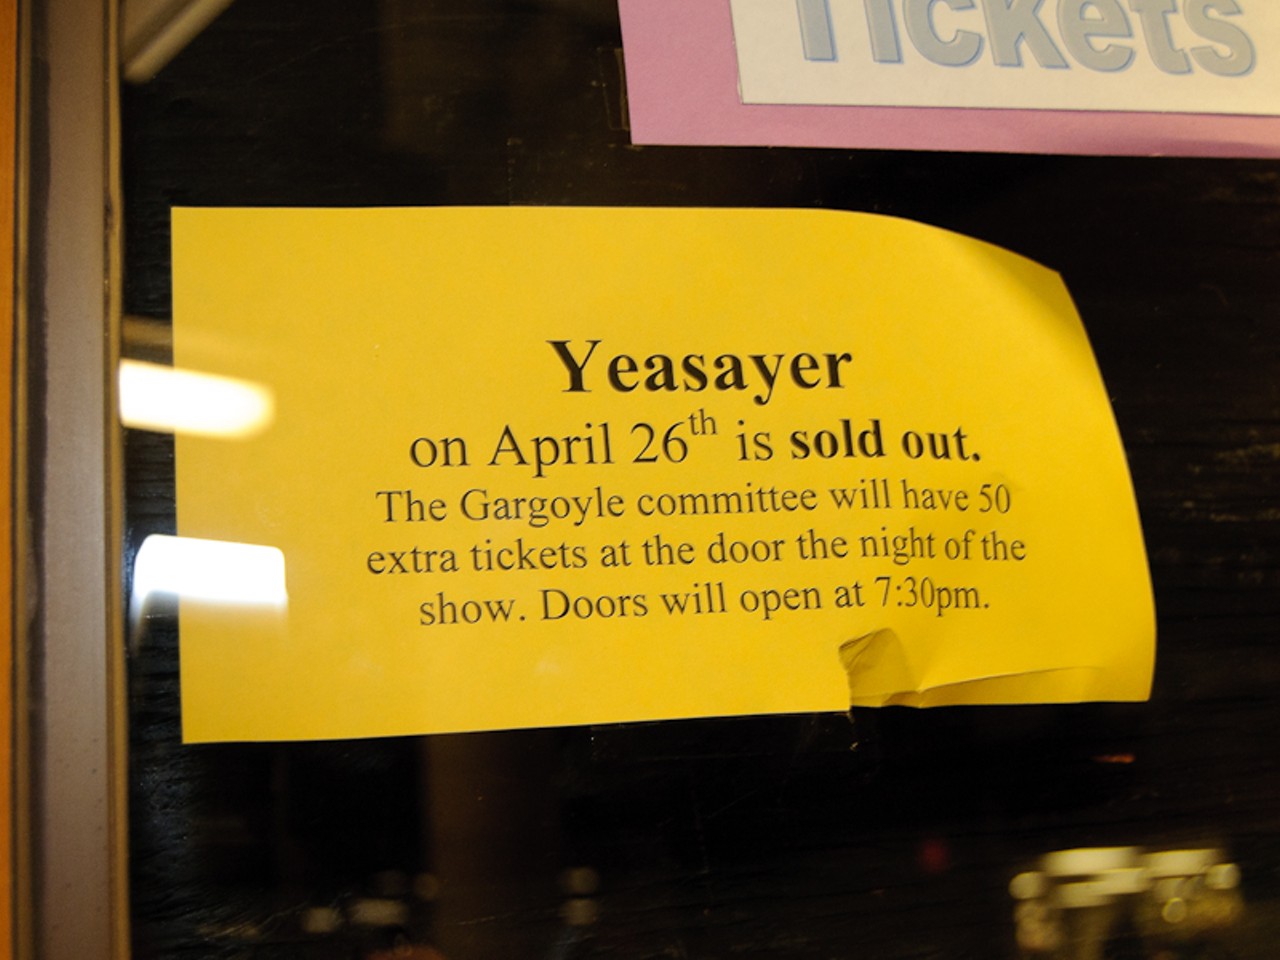 A sign posted at the Edison box office at Washington University before the Yeasayer show on April 26 caused confusion among fans who thought there were more general-public tickets available. The 50 extra tickets though, were reserved for students. Read the Yeasayer concert review here and see photos of Yeasayer at the Gargoyle at Washington University here.